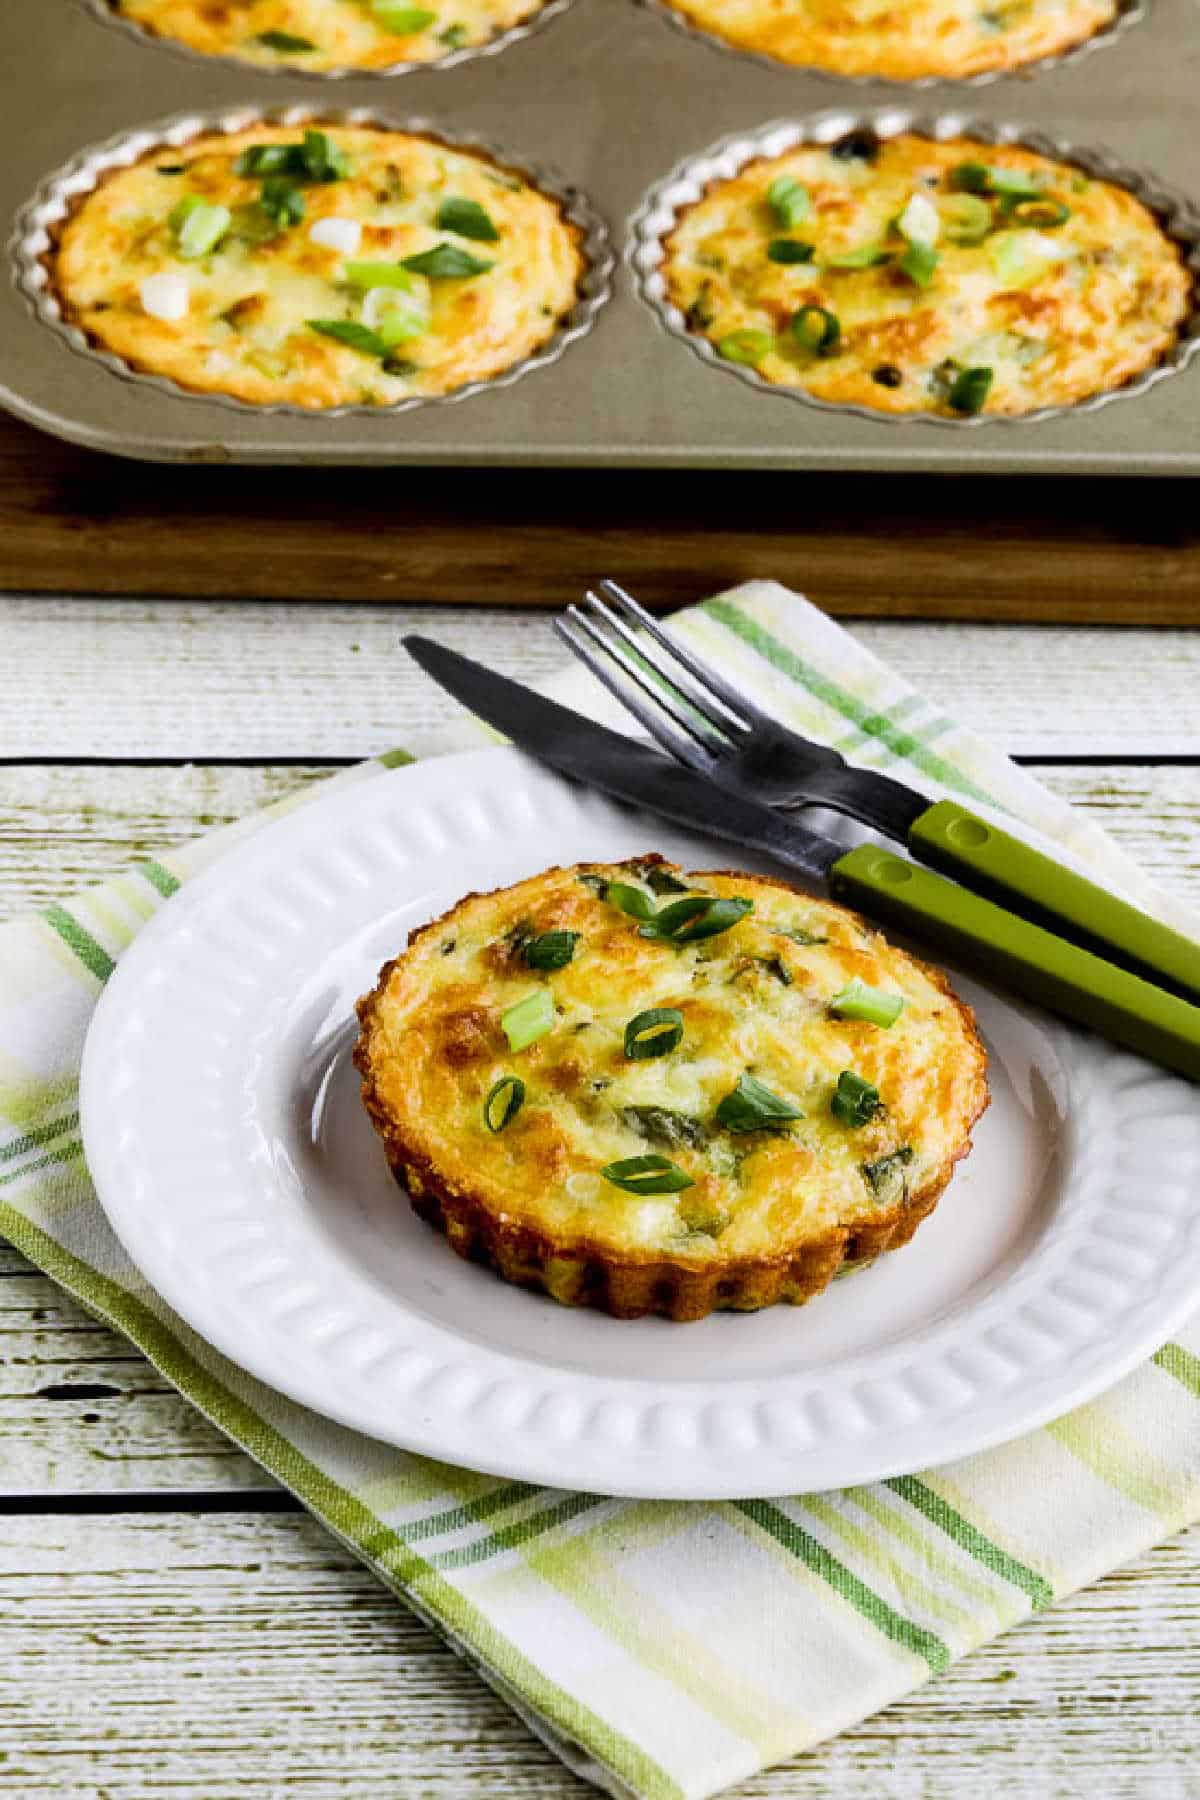 Zucchini breakfast tart shown on serving plate with tart in background, away